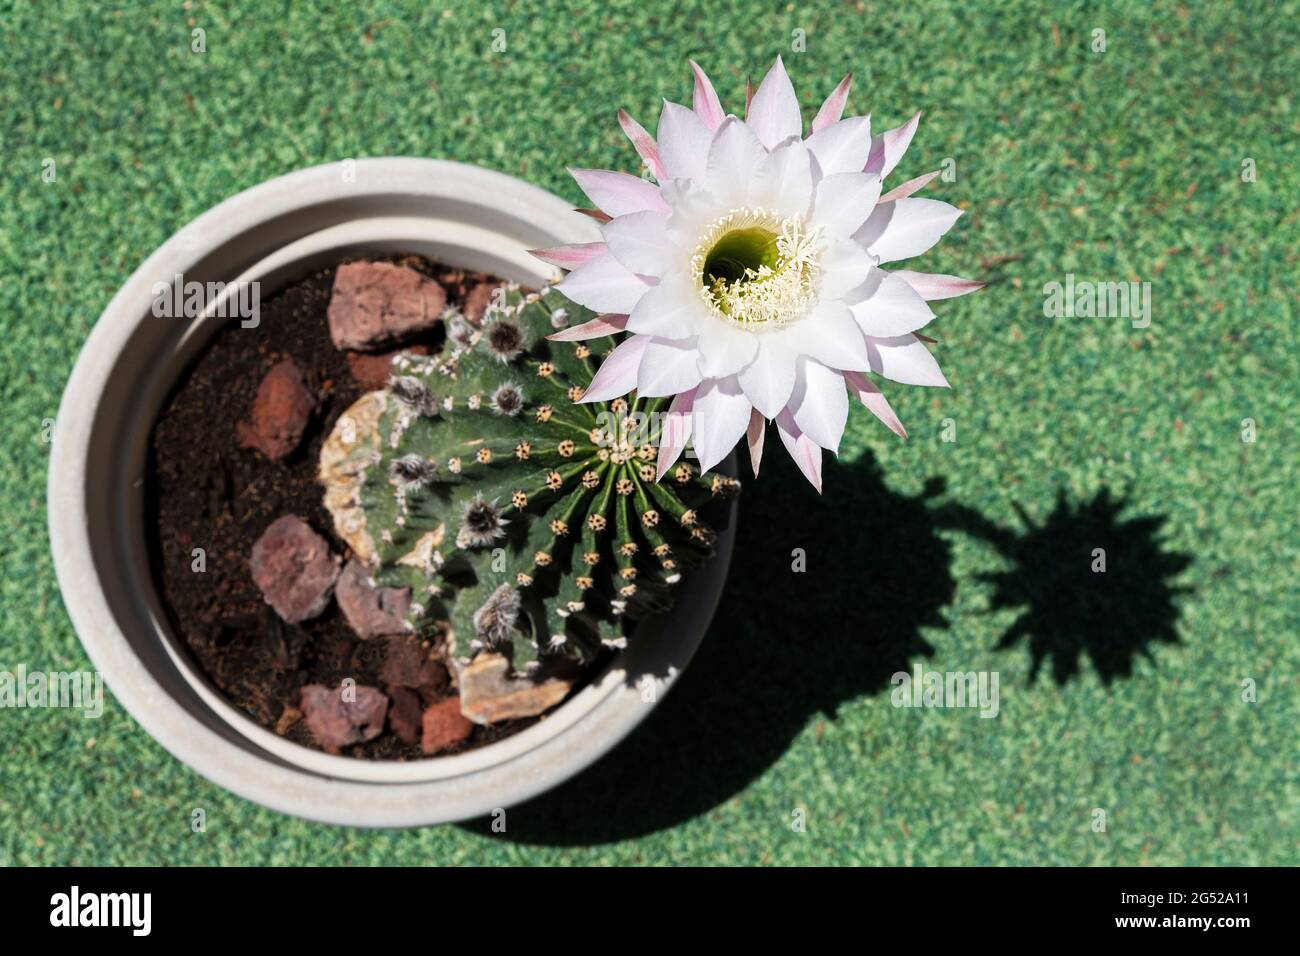 one exquisite white and pink echinopsis night blooming cactus flower rises high above the ugly thorny cactus plant in a pot on a blurry green lawn Stock Photo